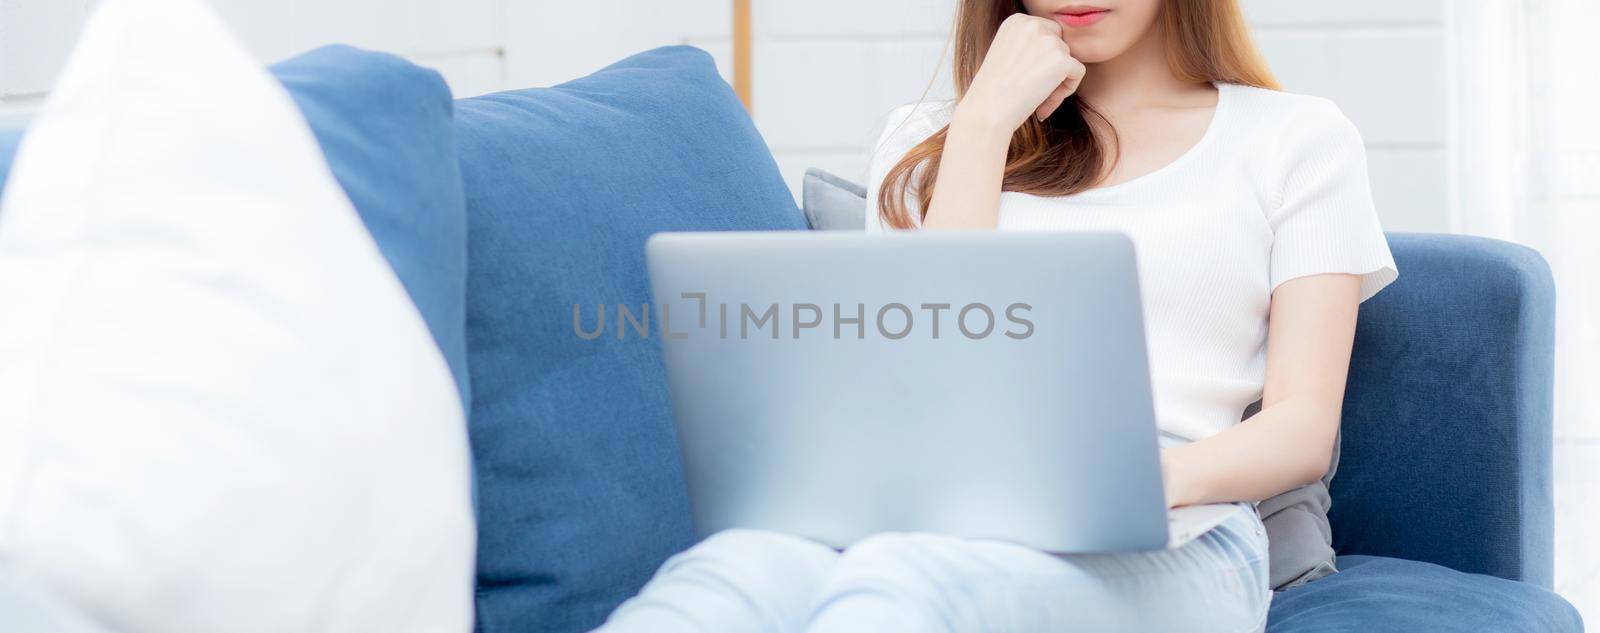 Young asian business woman smile and work from home with laptop computer online to internet on sofa in living room, freelance girl using notebook on couch with comfort, new normal, lifestyle concept.